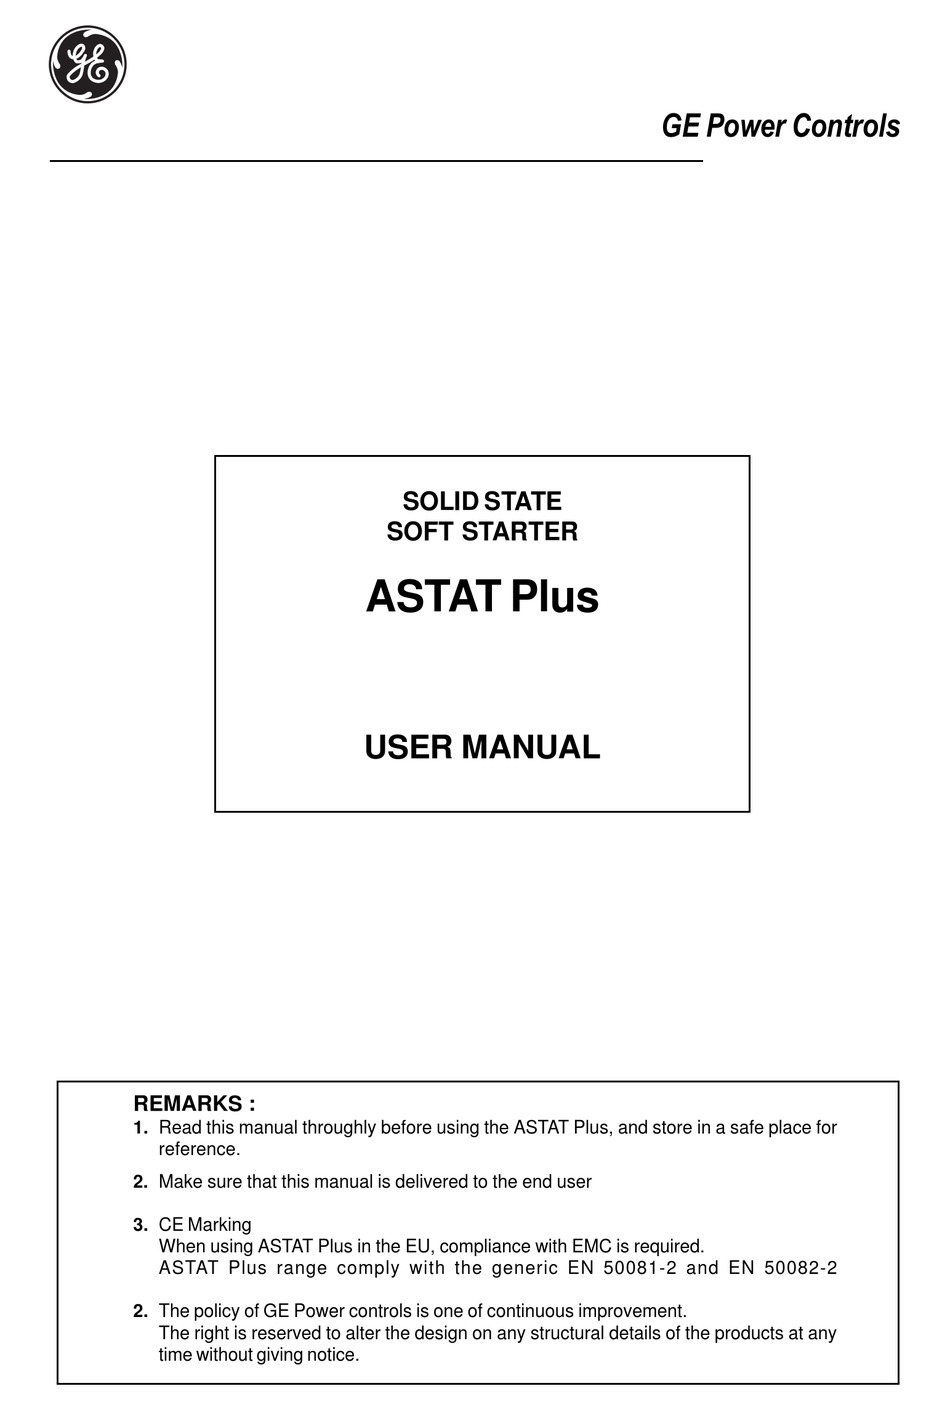 Cataloge ge 3.control  and_automation_dienhathe.com-5_softstarters_astat_plus_manual_ed02_english